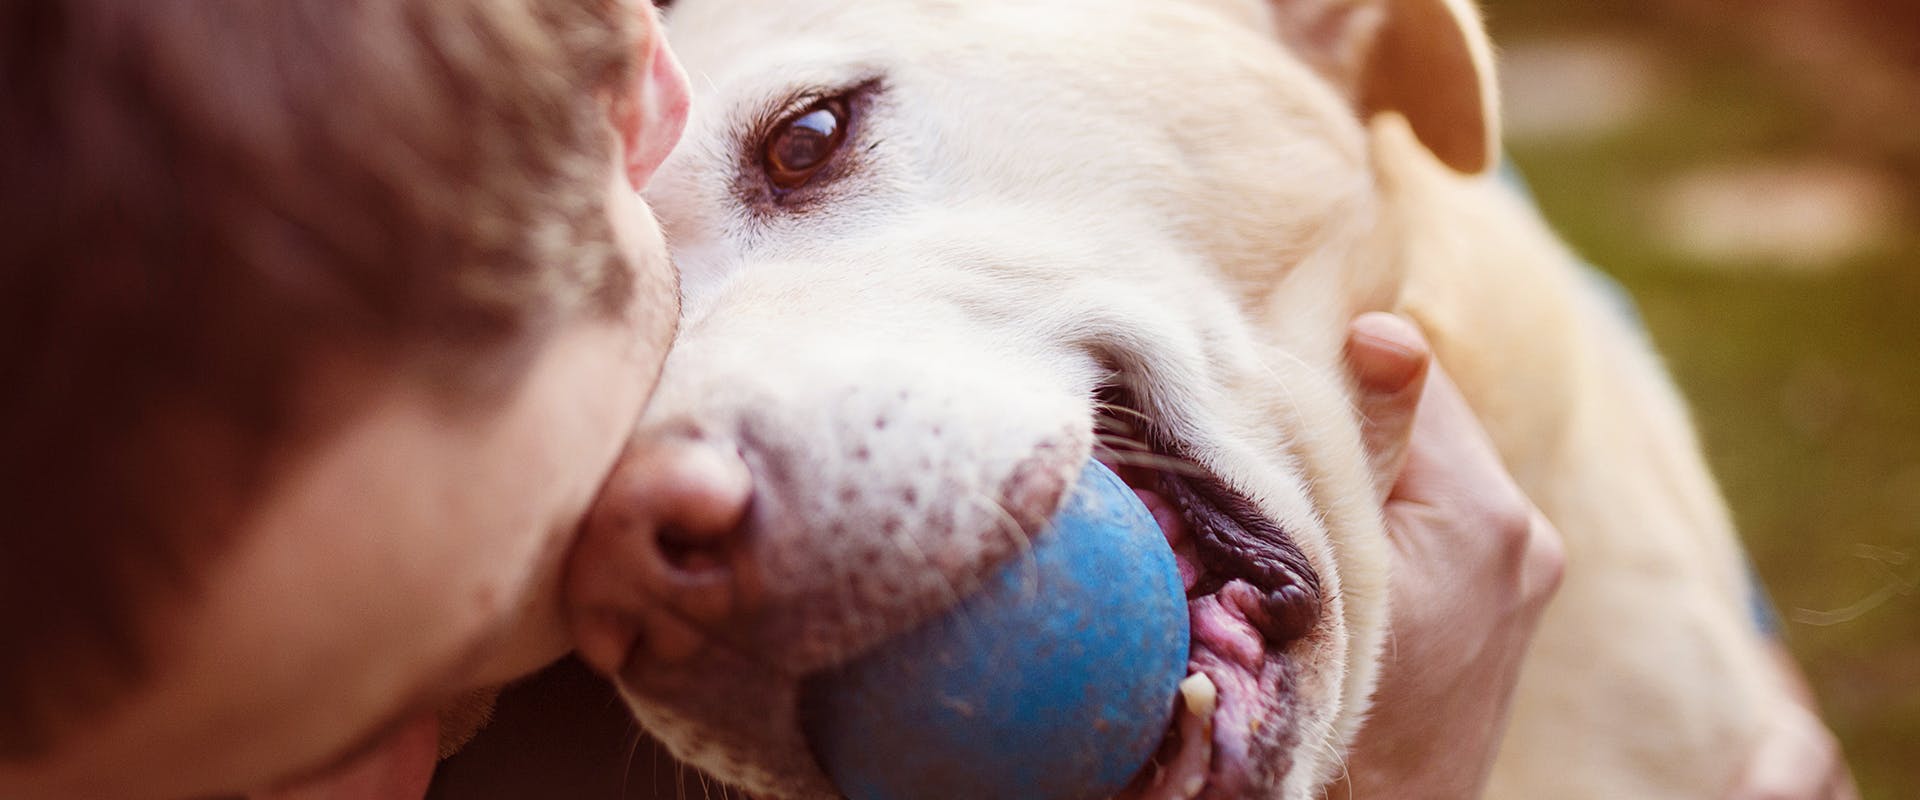 How to show your dog you love them: a happy looking dog cuddling up to a person, with a blue ball in his mouth